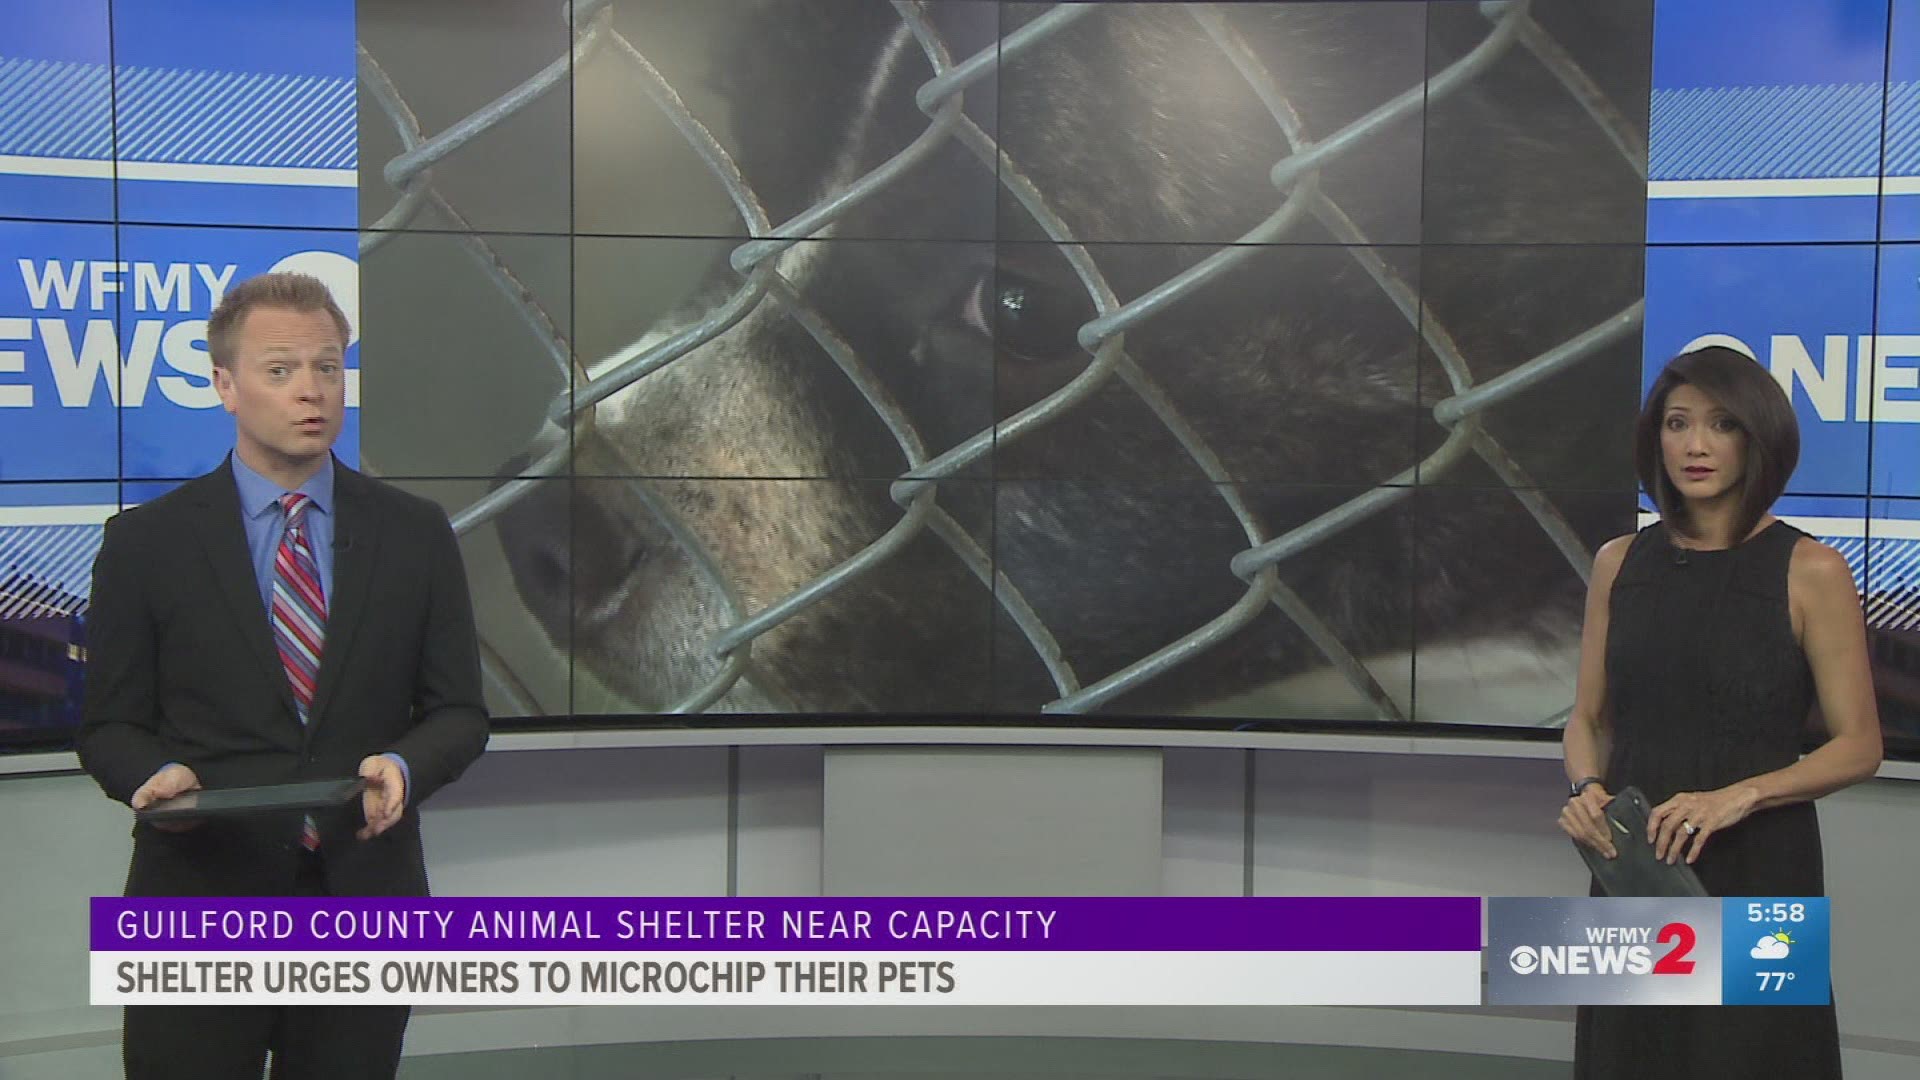 The Guilford County Animal Shelter says their nearing max capacity. Staff says a lot of the pets don't have microchips so they can't contact their owners.